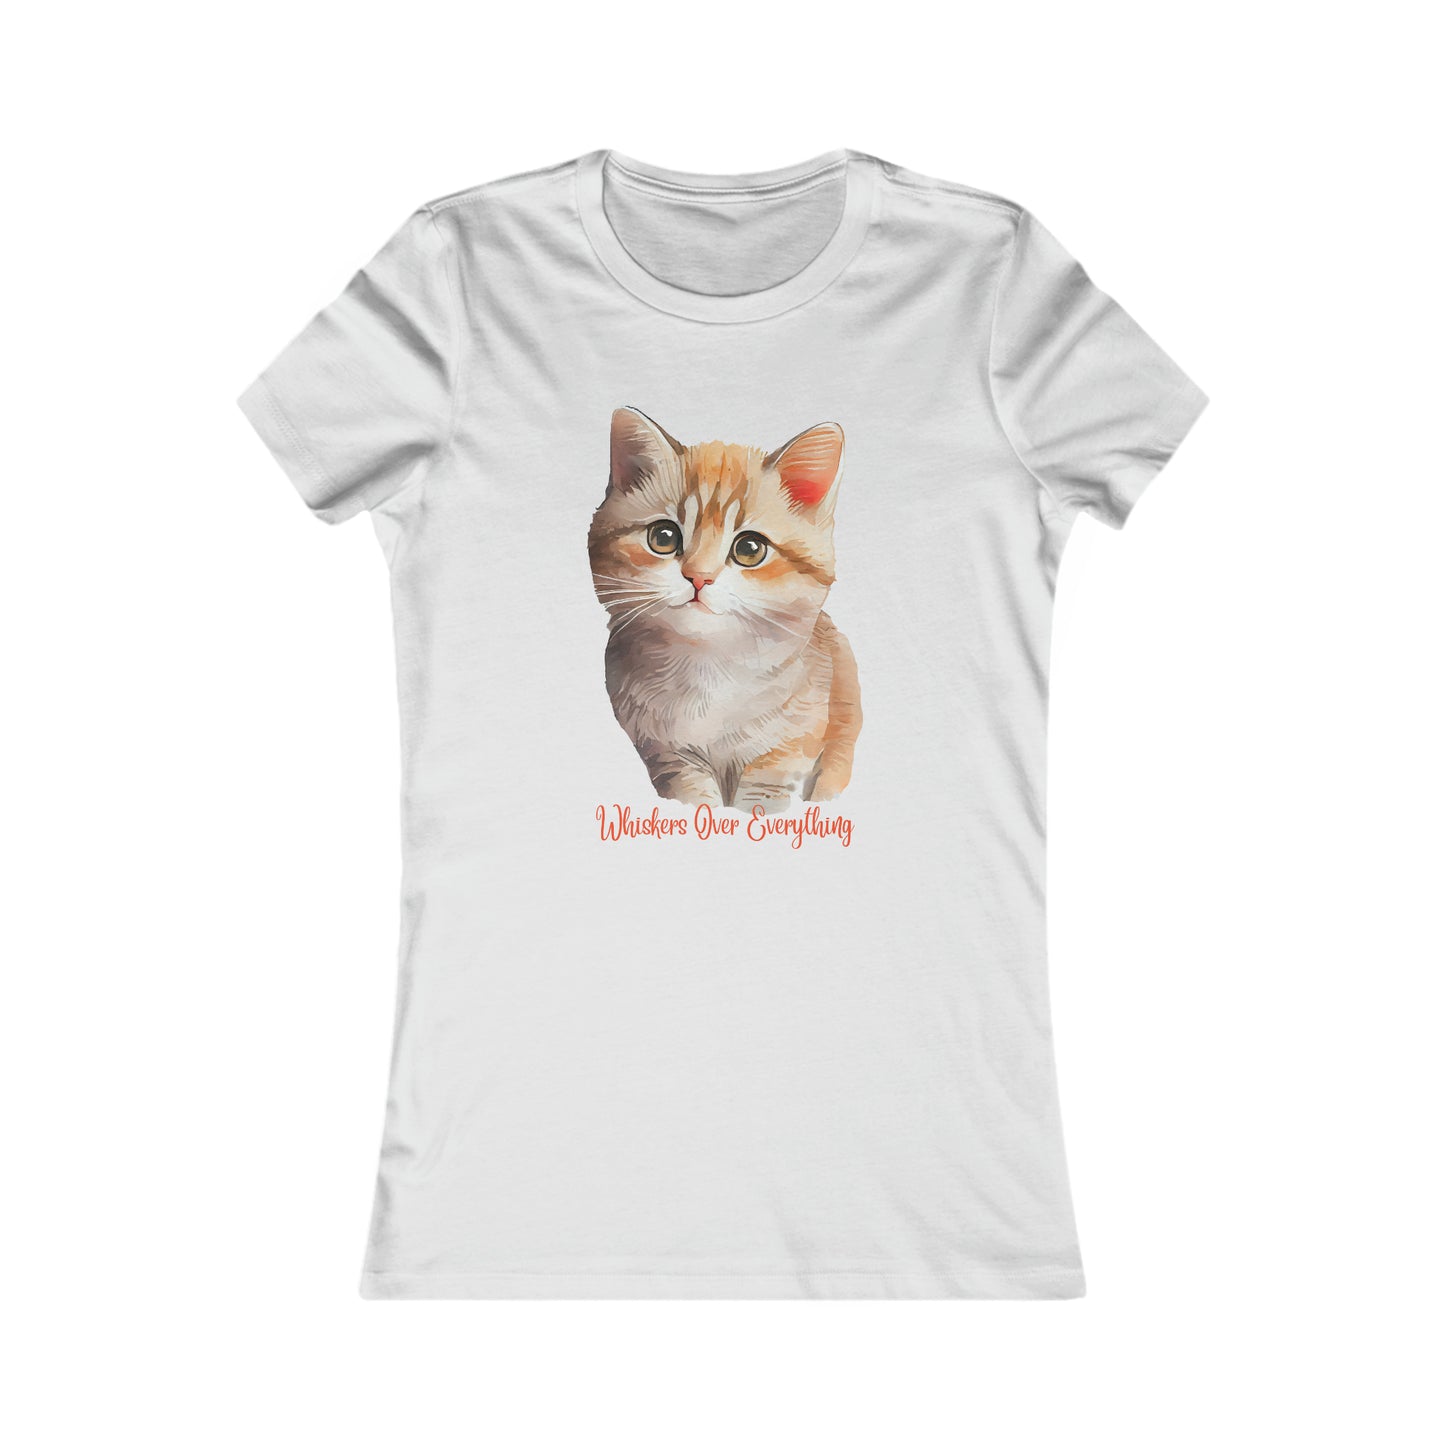 For that cat lover “Whiskers over everything” on this Women's Favorite Tee in several colors for you to choose from. Slim fit so please check the size table.